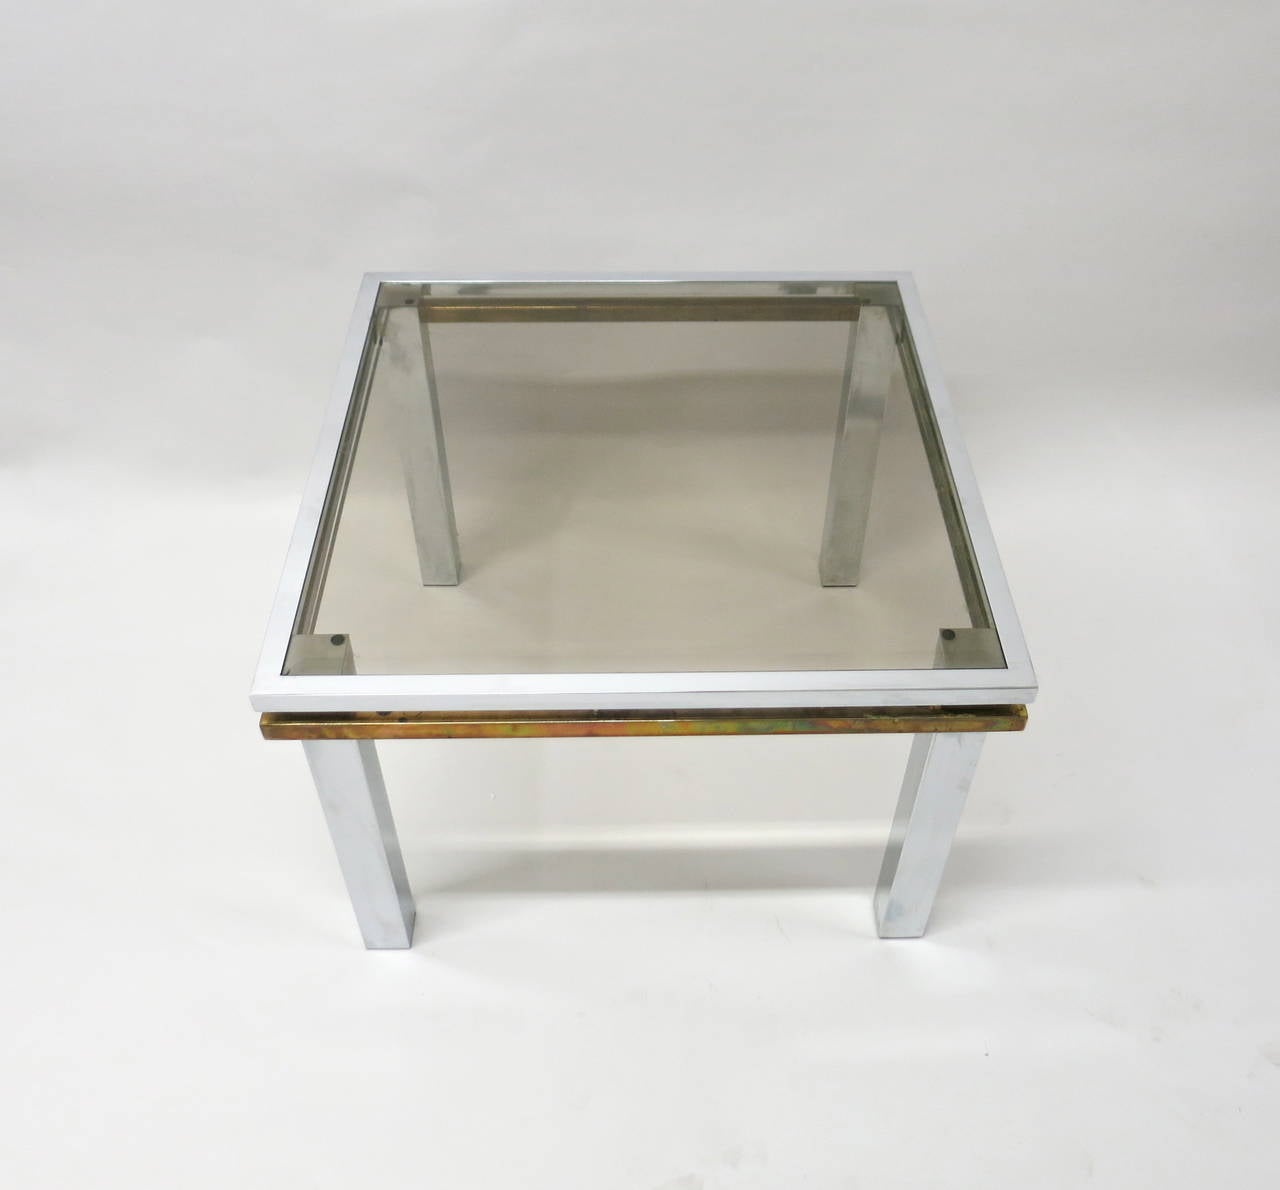 Pair of Side Tables have 2 1/4 inch chrome legs connected by two 1 inch frames, one in chrome and another in patinated brass. Each table has an inset glass top. Legs, frame, glass and tables are square.